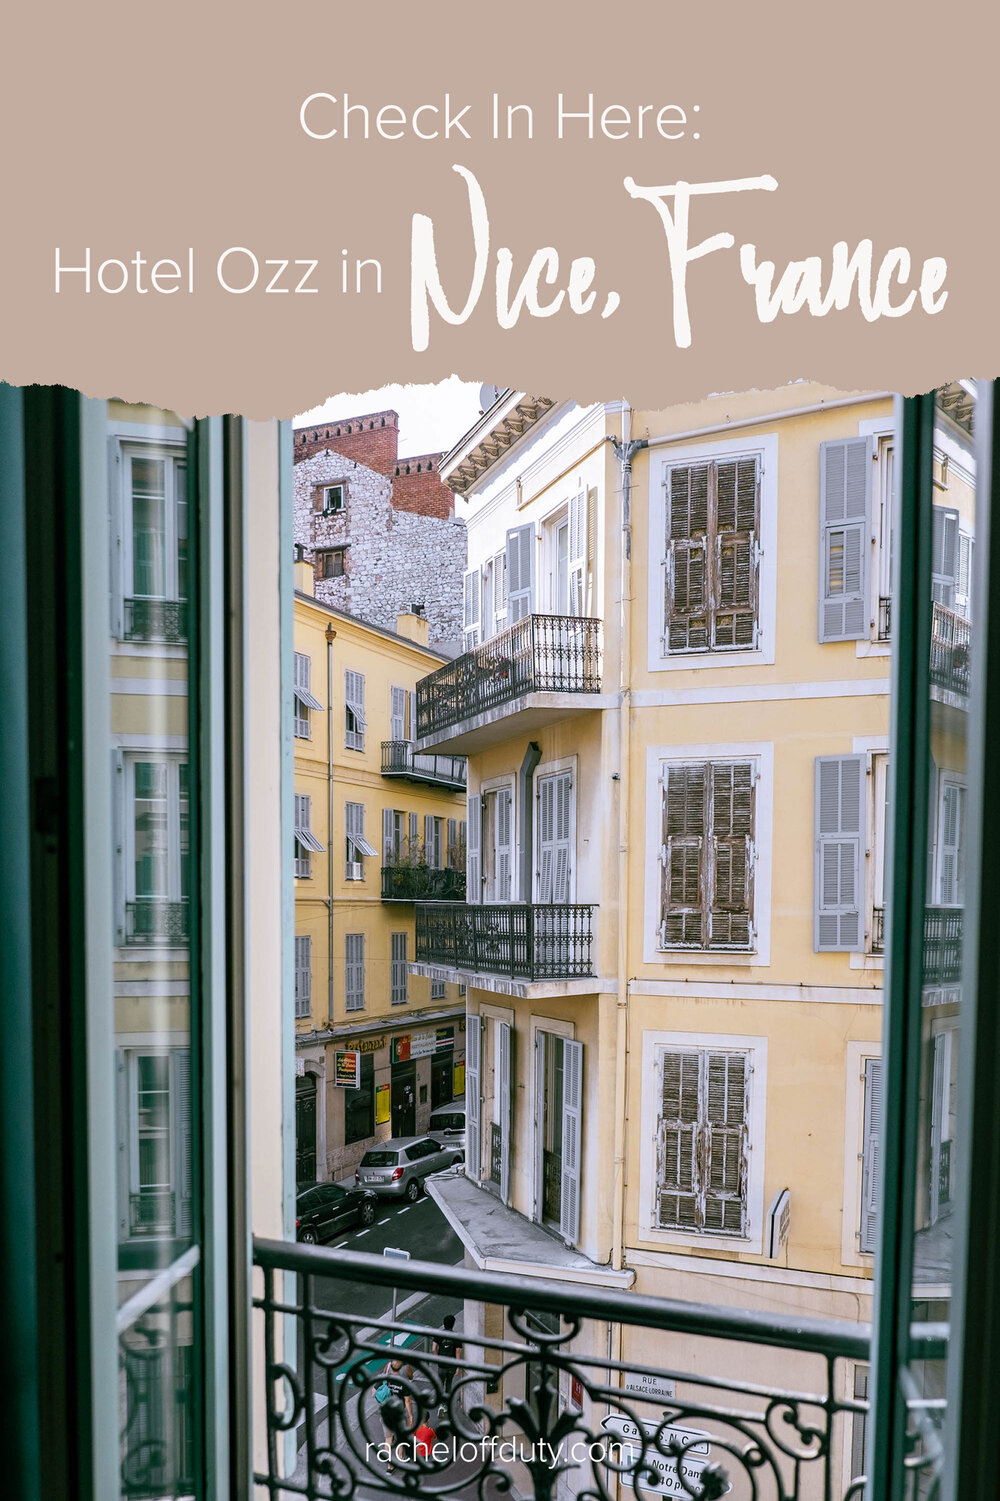 Rachel Off Duty: Where to Stay in Nice, France: The Hôtel Ozz